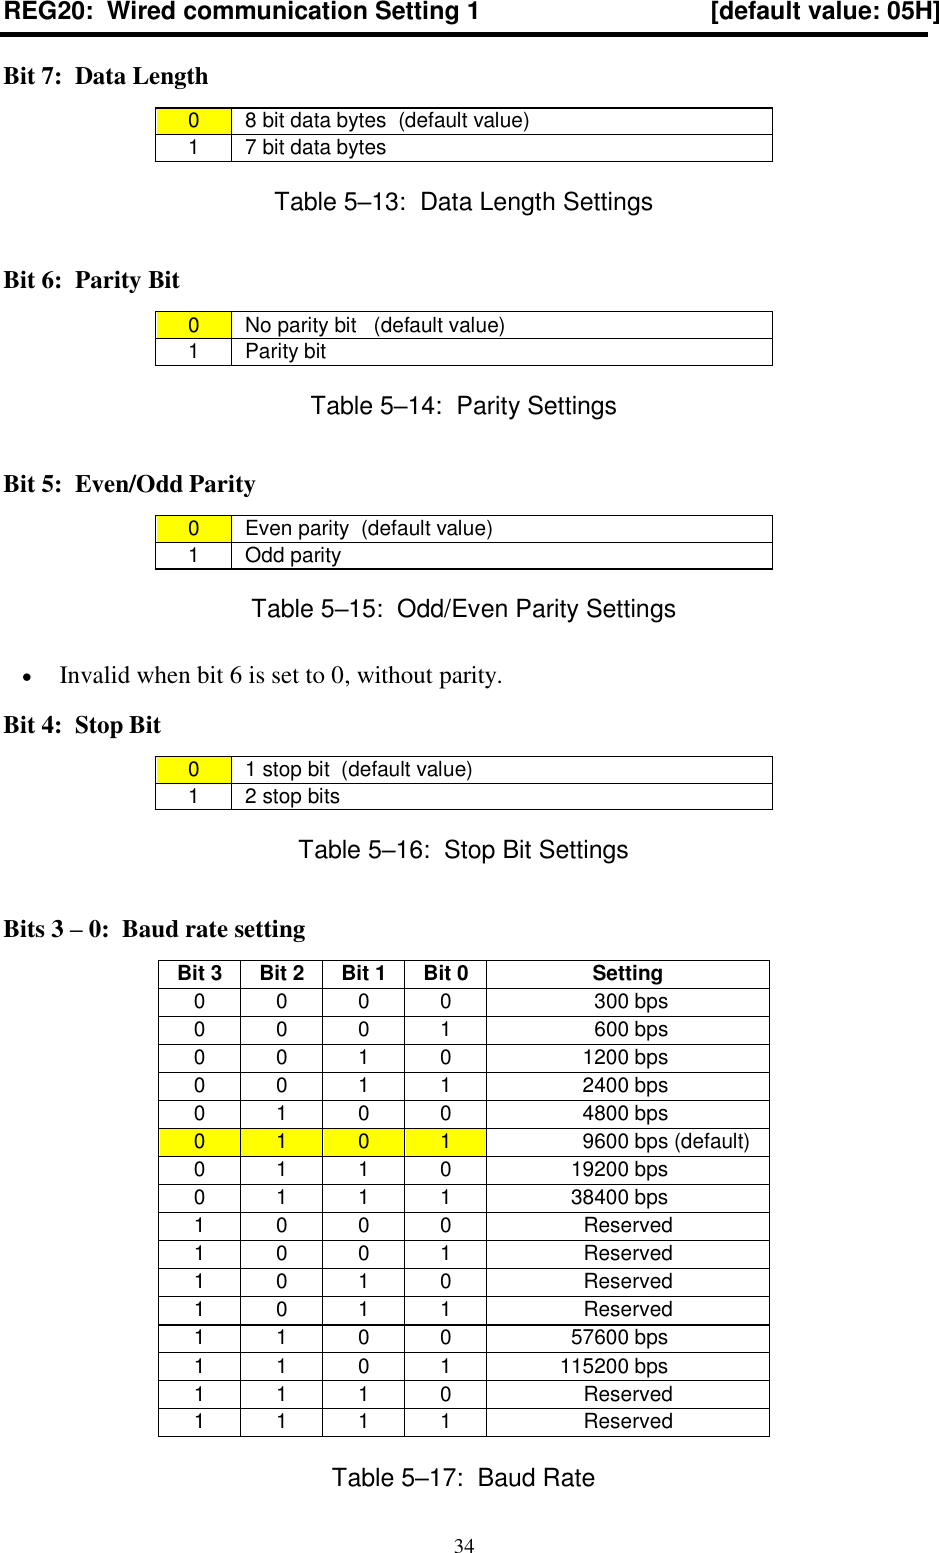  34 REG20:  Wired communication Setting 1  [default value: 05H] Bit 7:  Data Length 0  8 bit data bytes  (default value) 1  7 bit data bytes Table 5–13:  Data Length Settings Bit 6:  Parity Bit 0  No parity bit   (default value) 1  Parity bit Table 5–14:  Parity Settings Bit 5:  Even/Odd Parity 0  Even parity  (default value) 1  Odd parity Table 5–15:  Odd/Even Parity Settings  Invalid when bit 6 is set to 0, without parity. Bit 4:  Stop Bit 0  1 stop bit  (default value) 1  2 stop bits Table 5–16:  Stop Bit Settings Bits 3 – 0:  Baud rate setting Bit 3 Bit 2 Bit 1 Bit 0 Setting 0 0 0 0                   300 bps 0 0 0 1                   600 bps 0 0 1 0                 1200 bps 0 0 1 1                 2400 bps 0 1 0 0                 4800 bps 0 1 0 1                 9600 bps (default) 0 1 1 0               19200 bps 0 1 1 1               38400 bps 1 0 0 0 Reserved 1 0 0 1 Reserved 1 0 1 0 Reserved 1 0 1 1 Reserved 1 1 0 0               57600 bps 1 1 0 1             115200 bps 1 1 1 0 Reserved 1 1 1 1 Reserved Table 5–17:  Baud Rate 